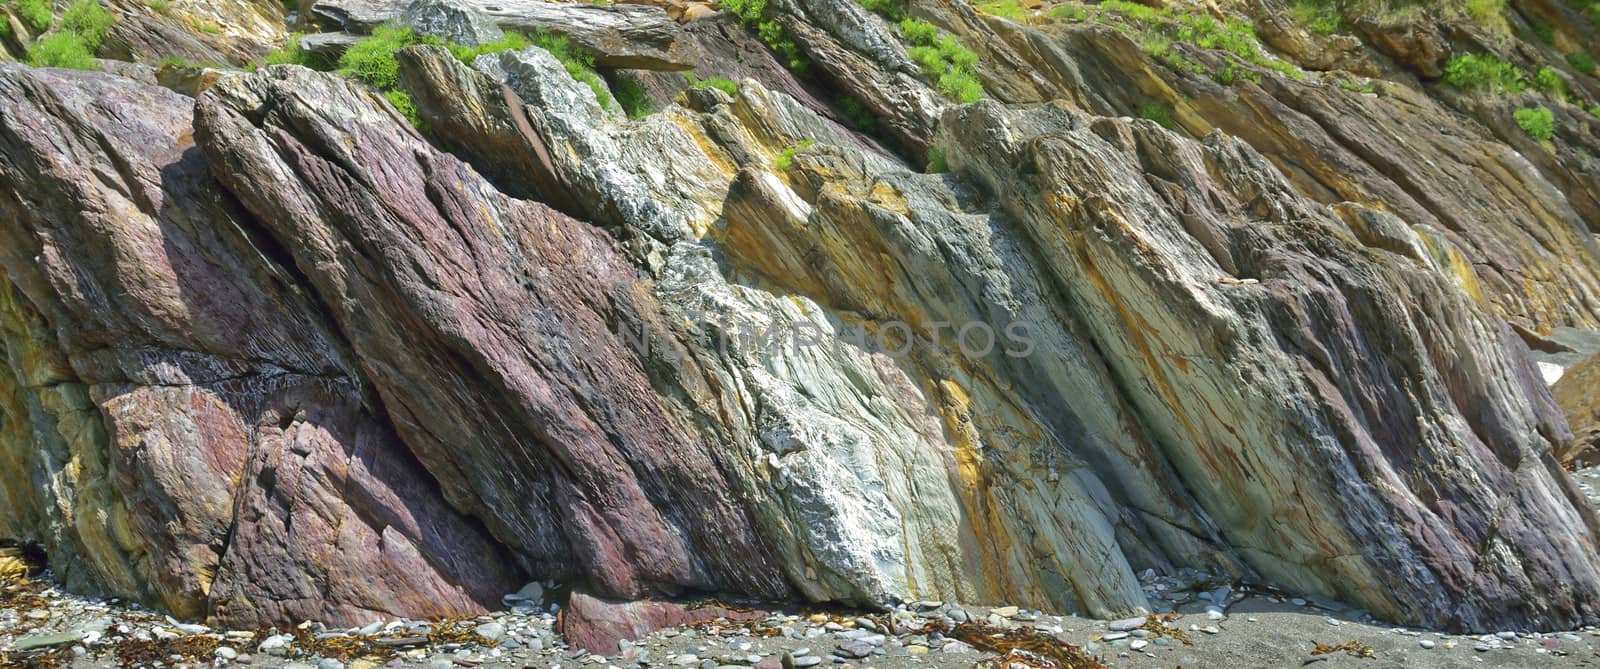 Image of a section of the cliffs/ rocks at Carylon Bay on the Coast of Cornwall, UK.